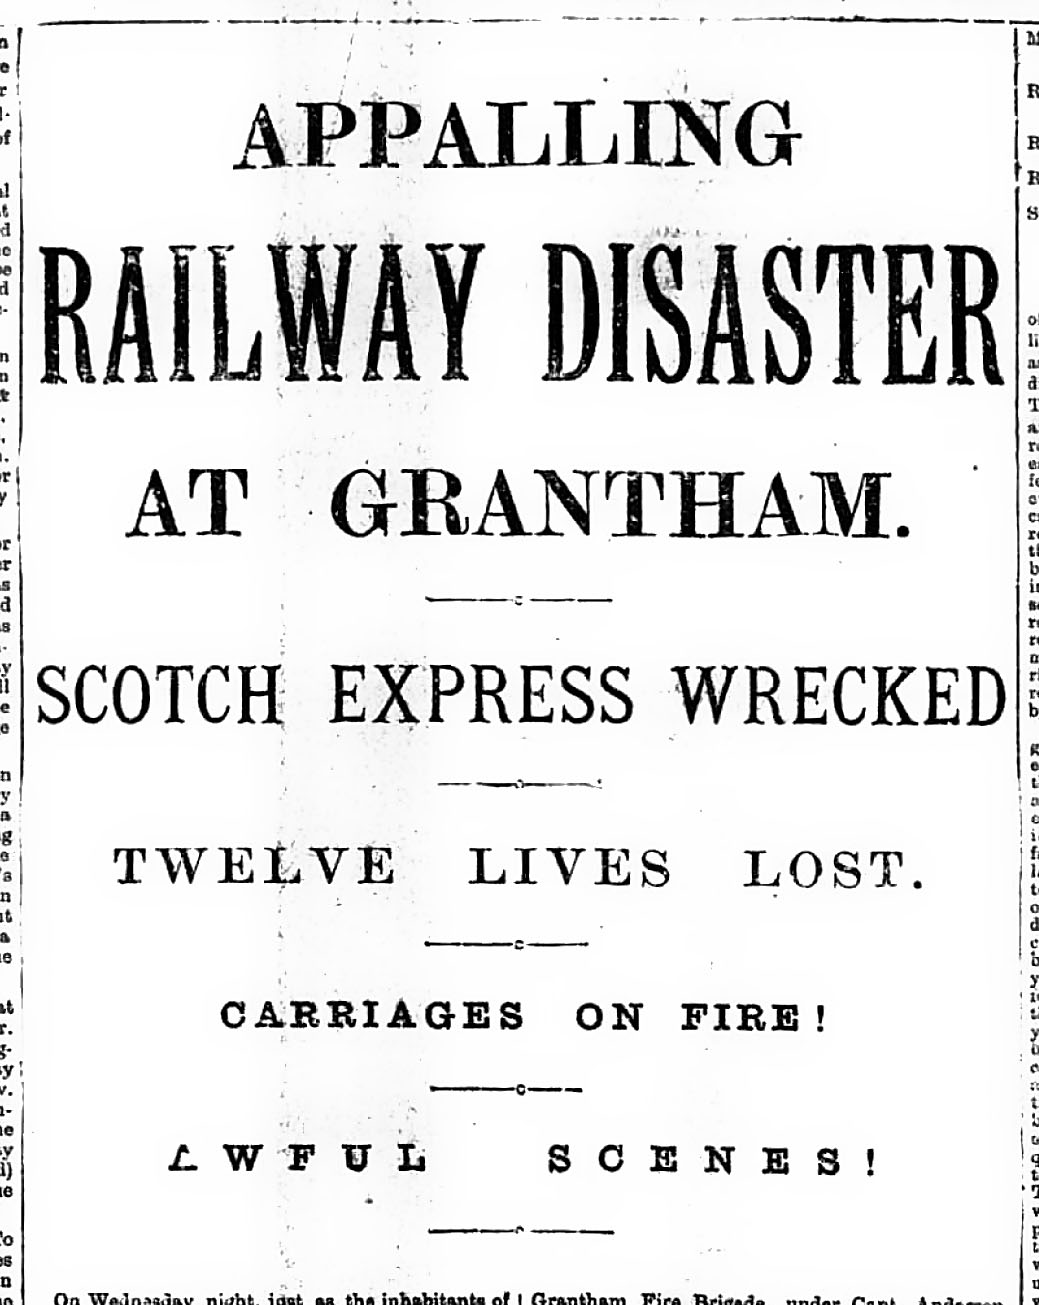 There were ultimately 14 fatalities. Twelve people perished in the wreckage and two of the persons who were rescued died in hospital four weeks after the accident. From The Grantham Journal of 22nd September 1906 From The British Newspaper Archive Image © THE BRITISH LIBRARY BOARD. ALL RIGHTS RESERVED.